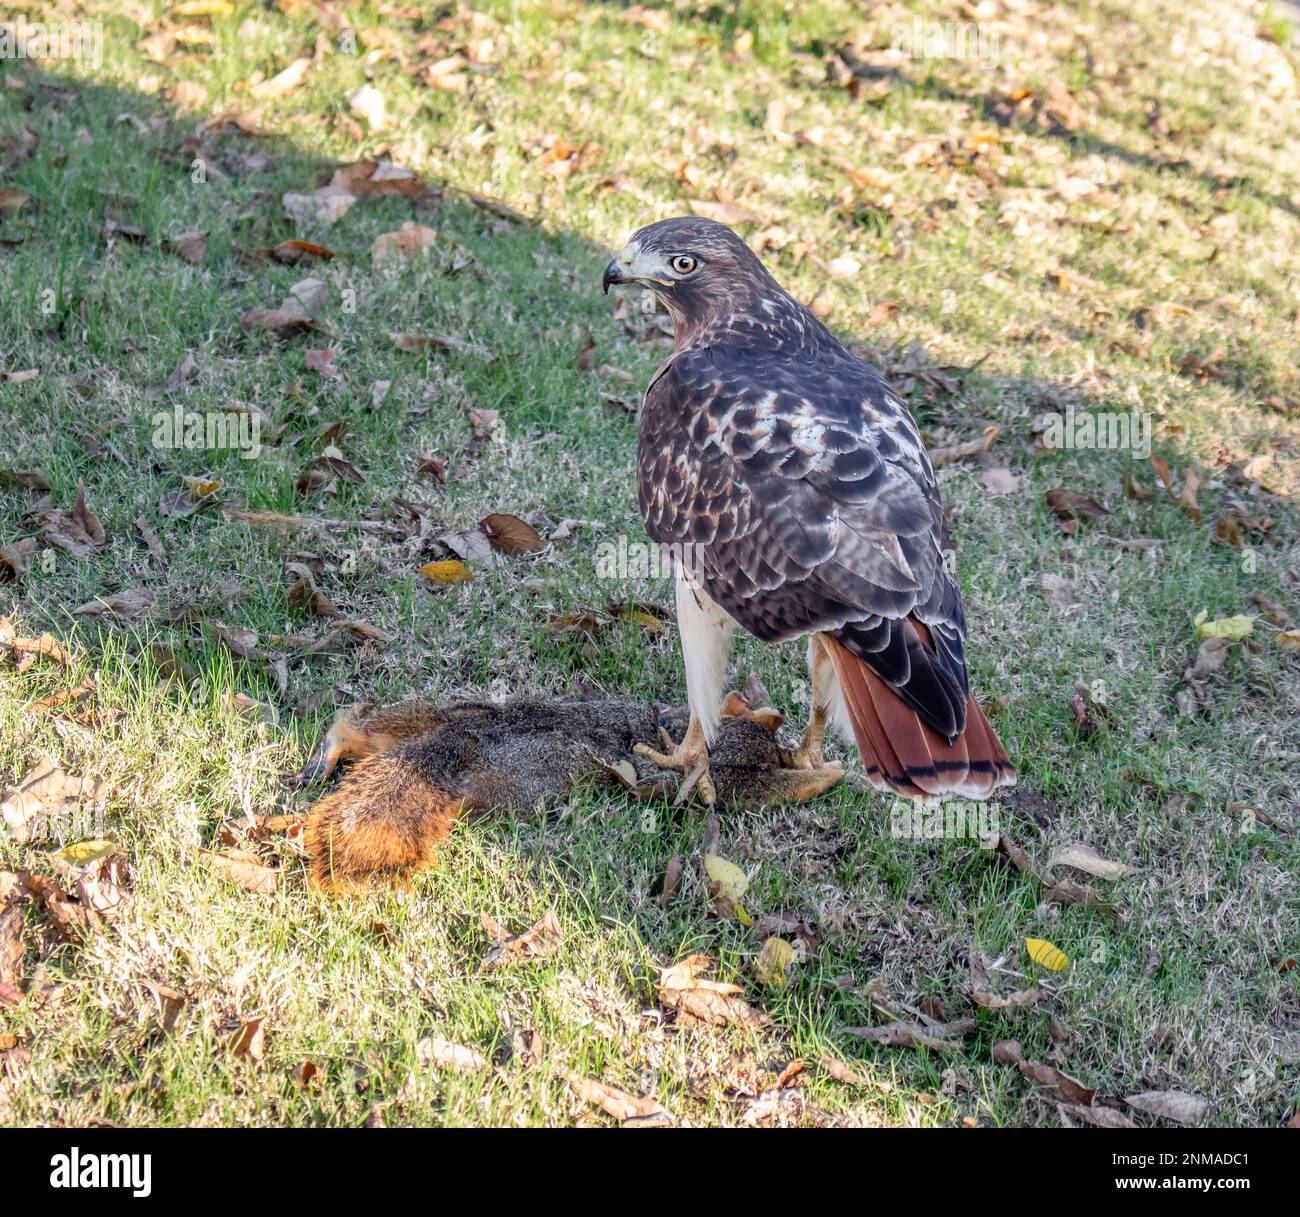 - Predator-Red tailed hawk with tail toward camera but face clearly visable standing on a dead squirrel on grass with fall leaves Stock Photo